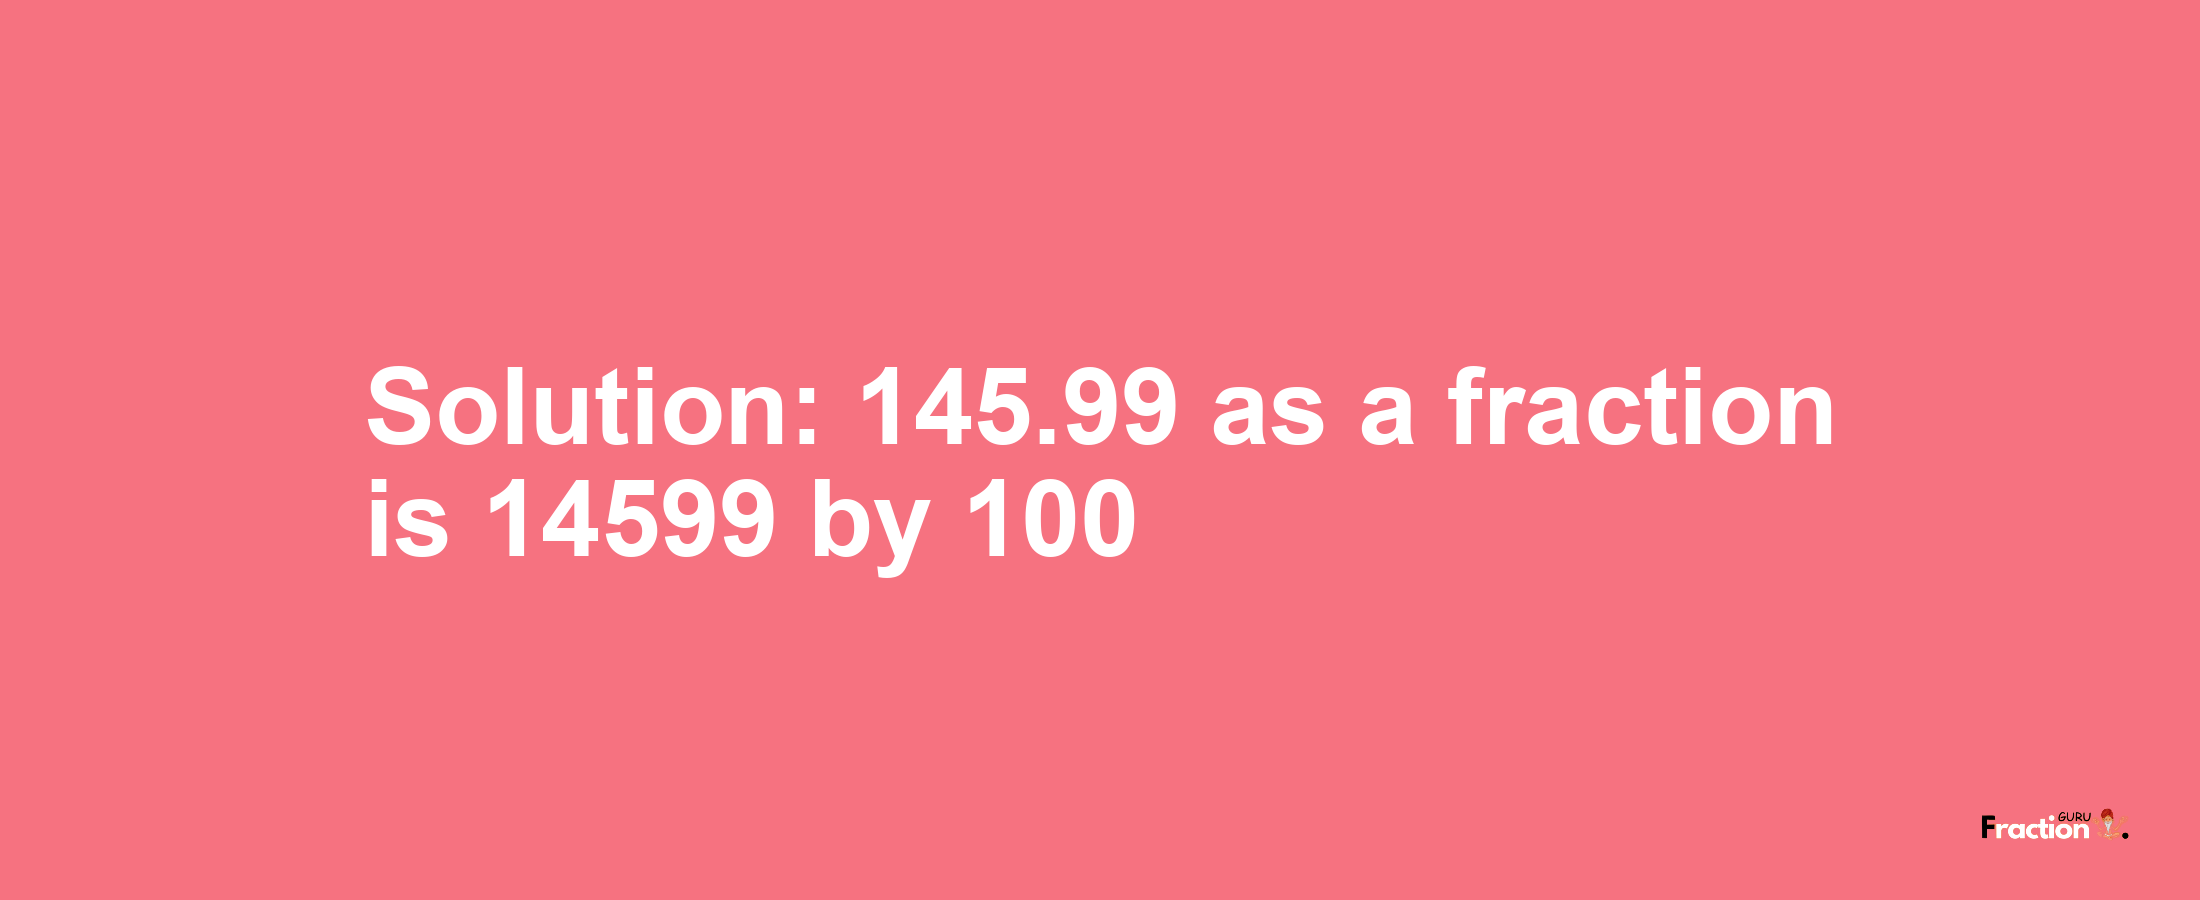 Solution:145.99 as a fraction is 14599/100